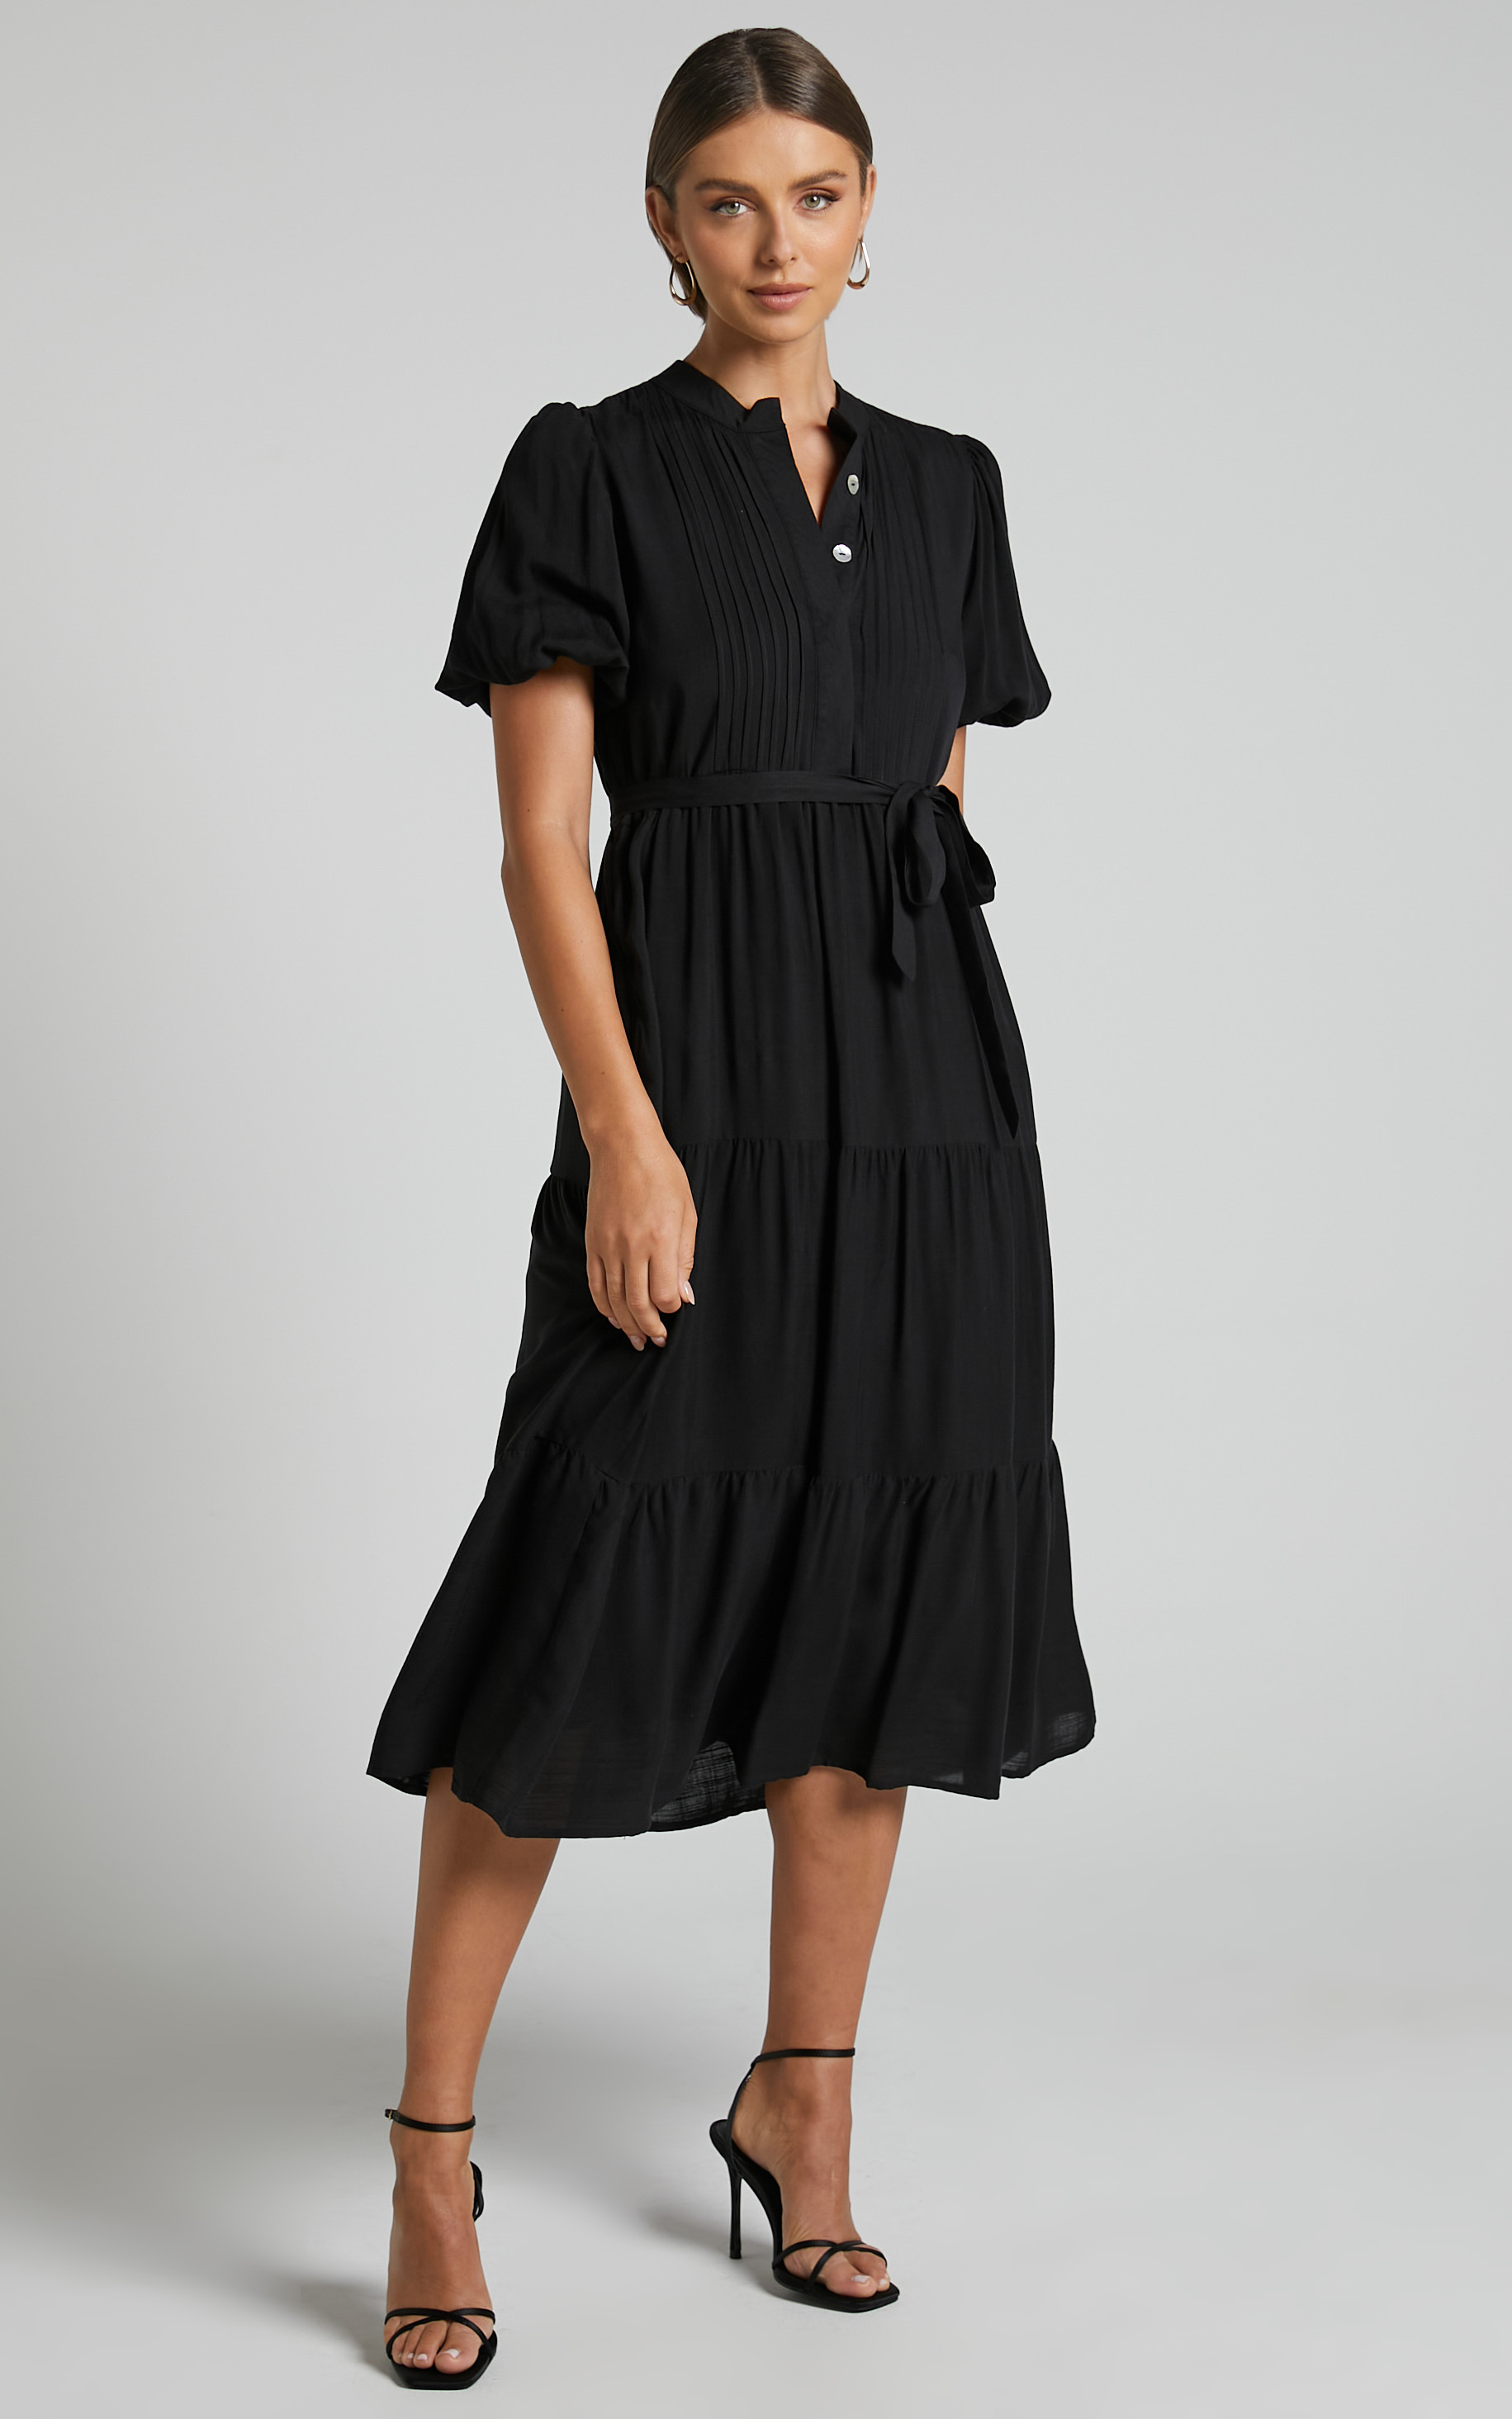 Lenessia Midi Dress - Puff Sleeve Collared Smock Dress in Black - 06, BLK1, hi-res image number null